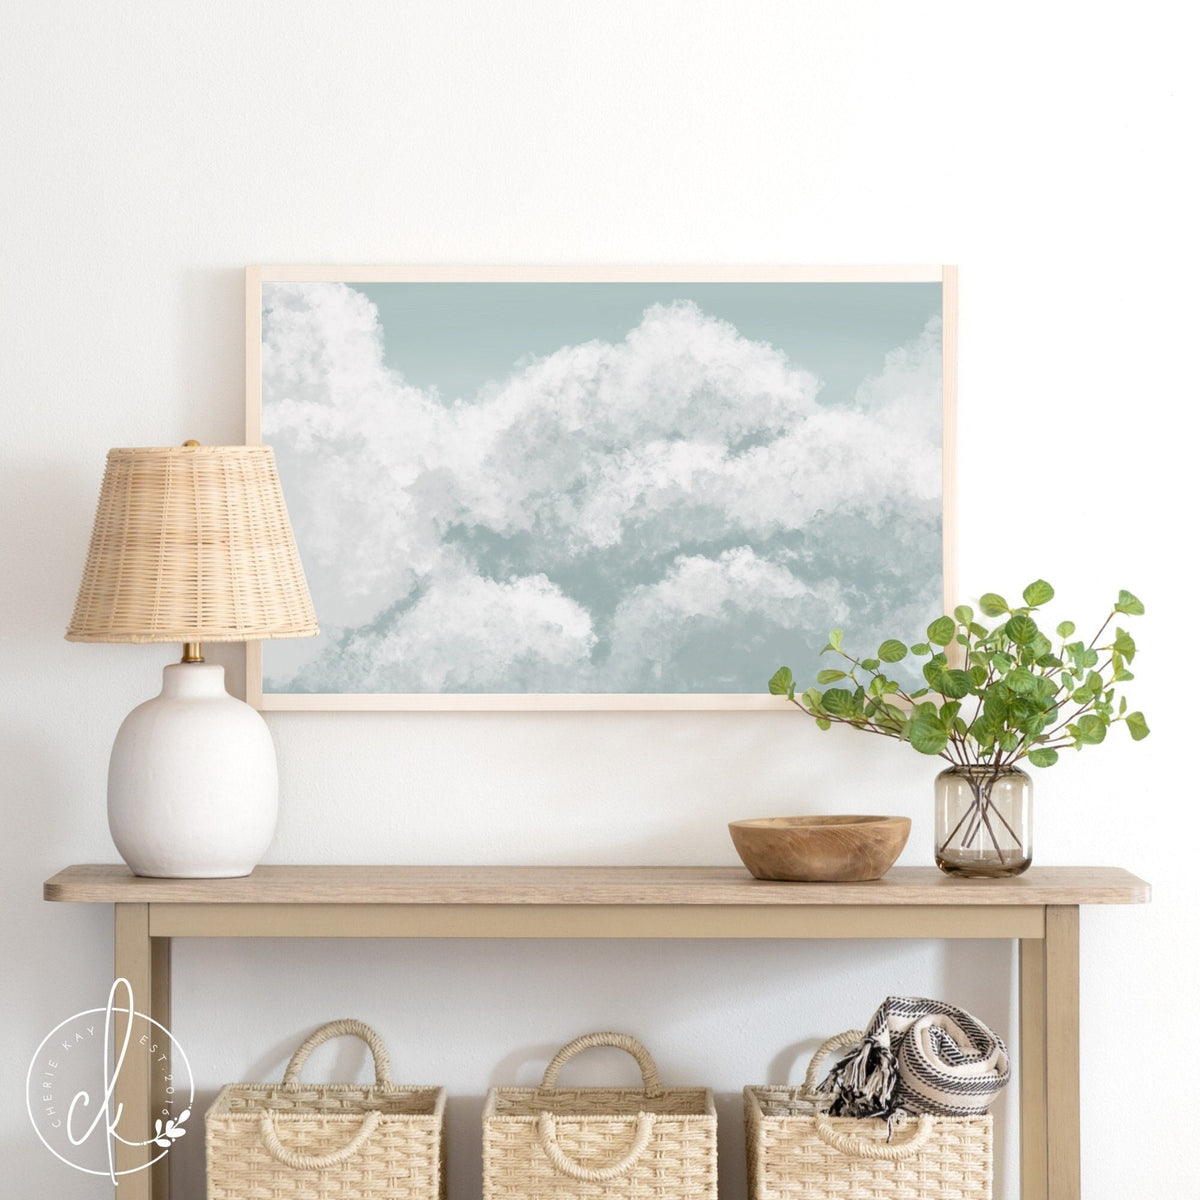 A painting of blue sky and clouds on a sunny day. This painting is framed with a natural pine frame, and is displayed above a table with a lamp and other home decor.